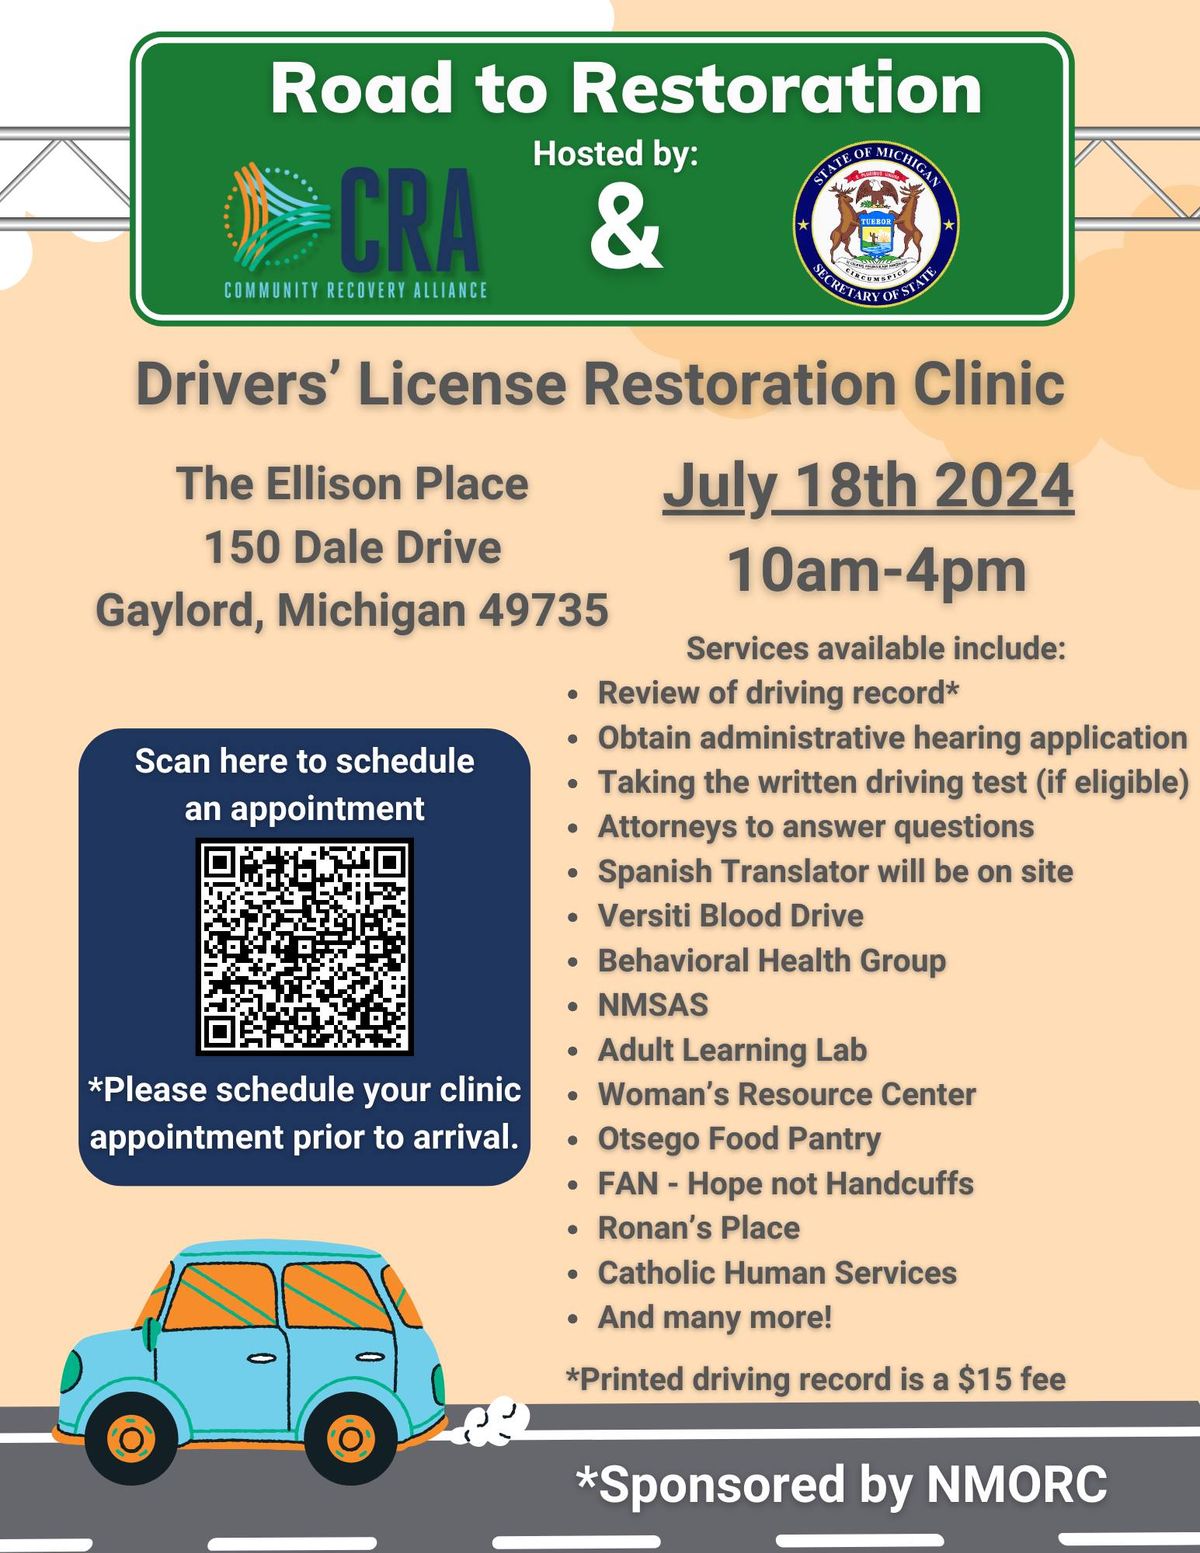 Road to Restoration - Drivers' License Restoration Clinic in Gaylord